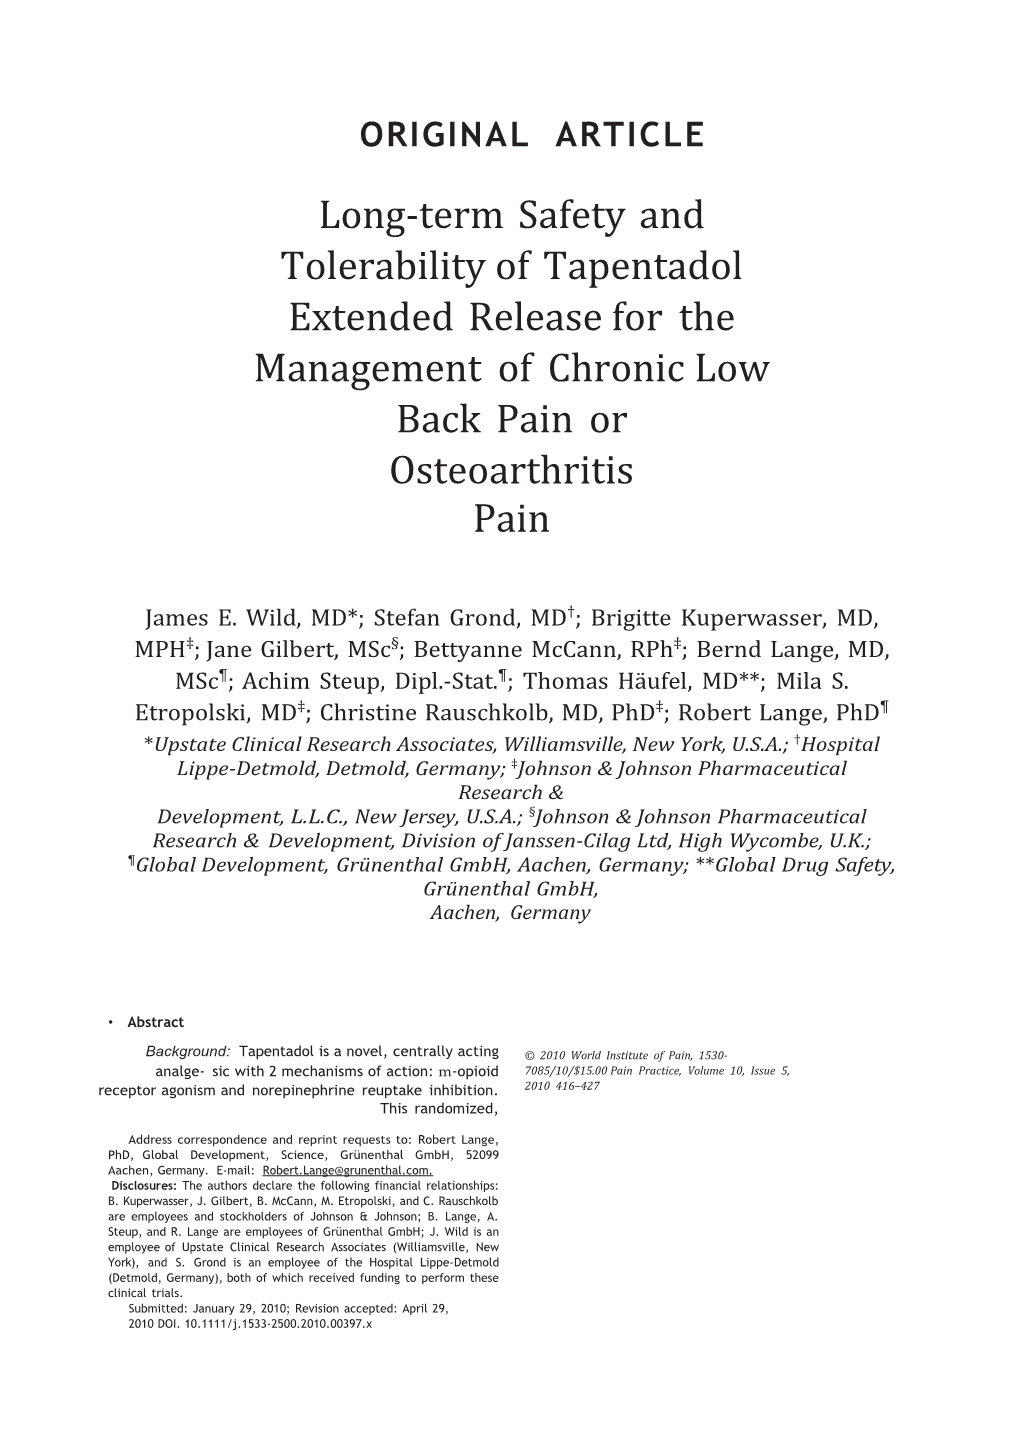 Longterm Safety and Tolerability of Tapentadol Extended Release for the Management of Chronic